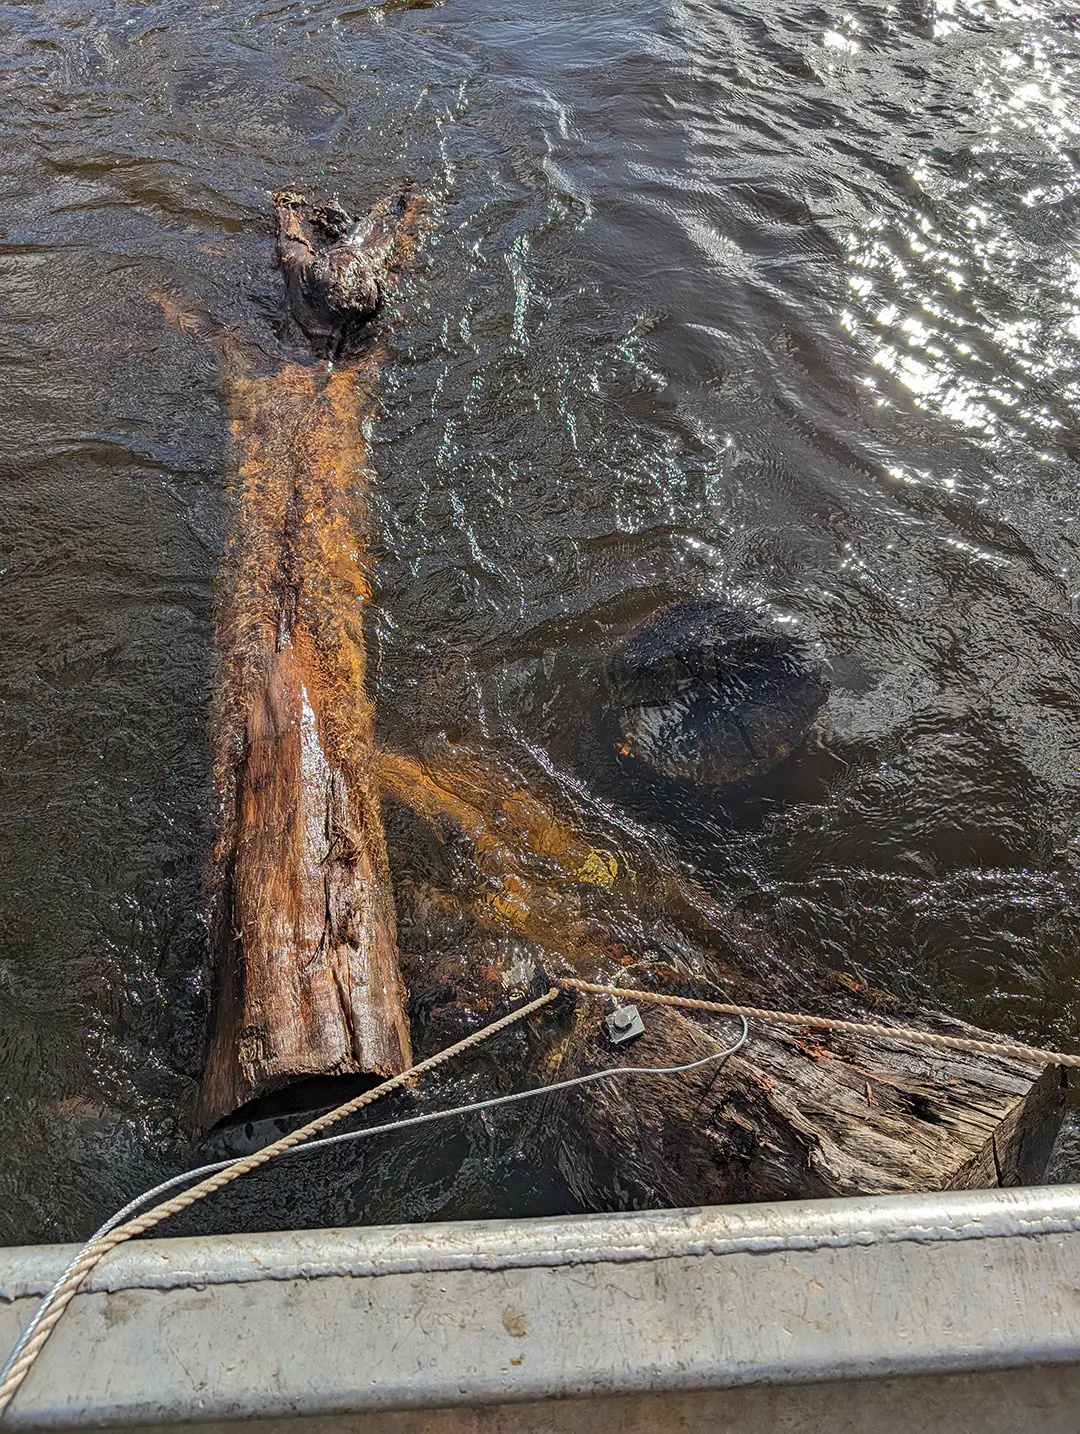 Log floating in water tied to a boat